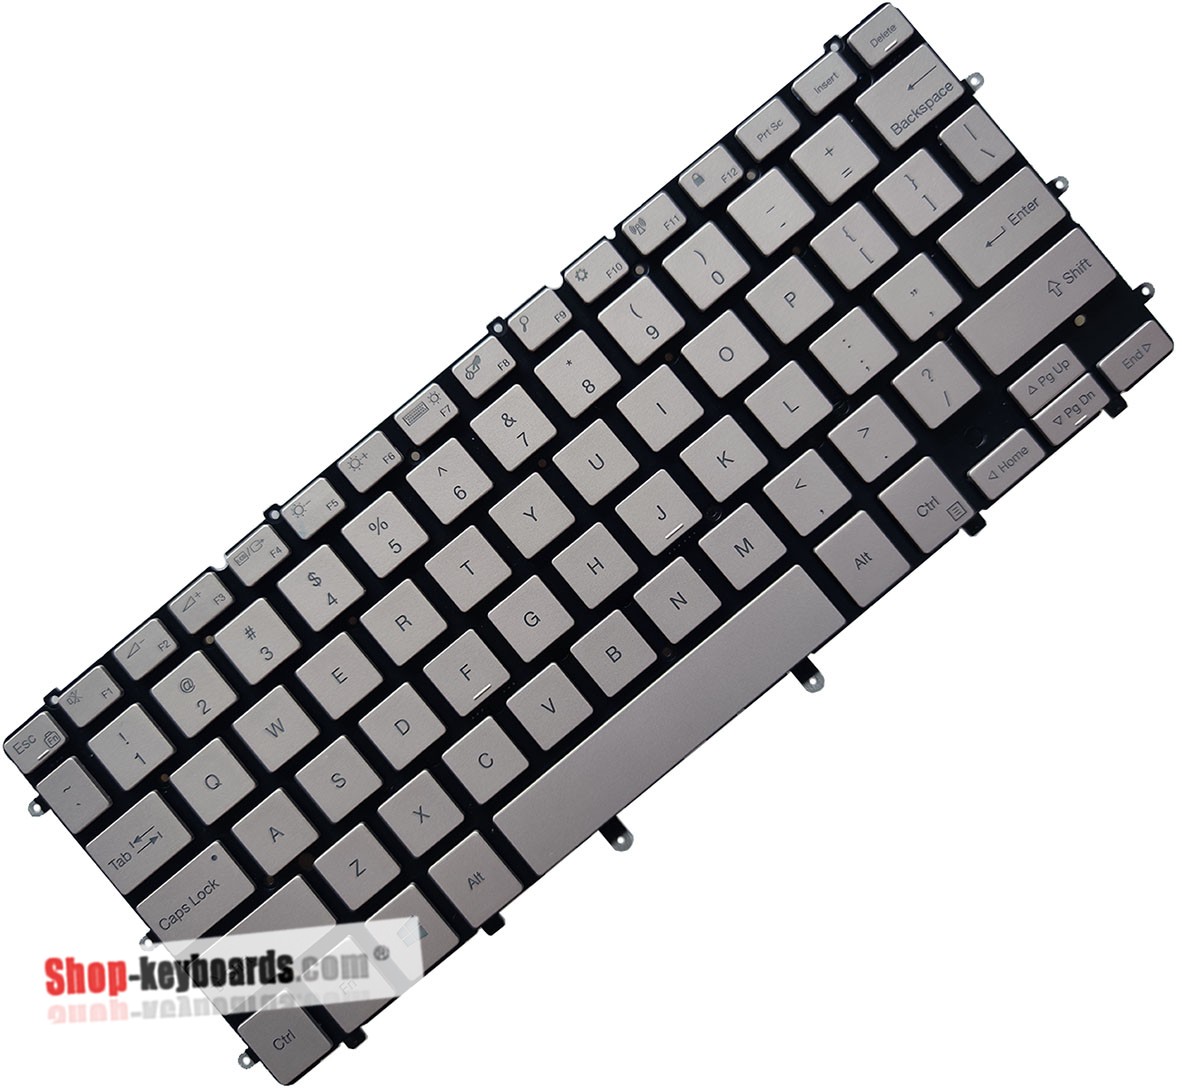 QUANTA AETX7I00020 Keyboard replacement